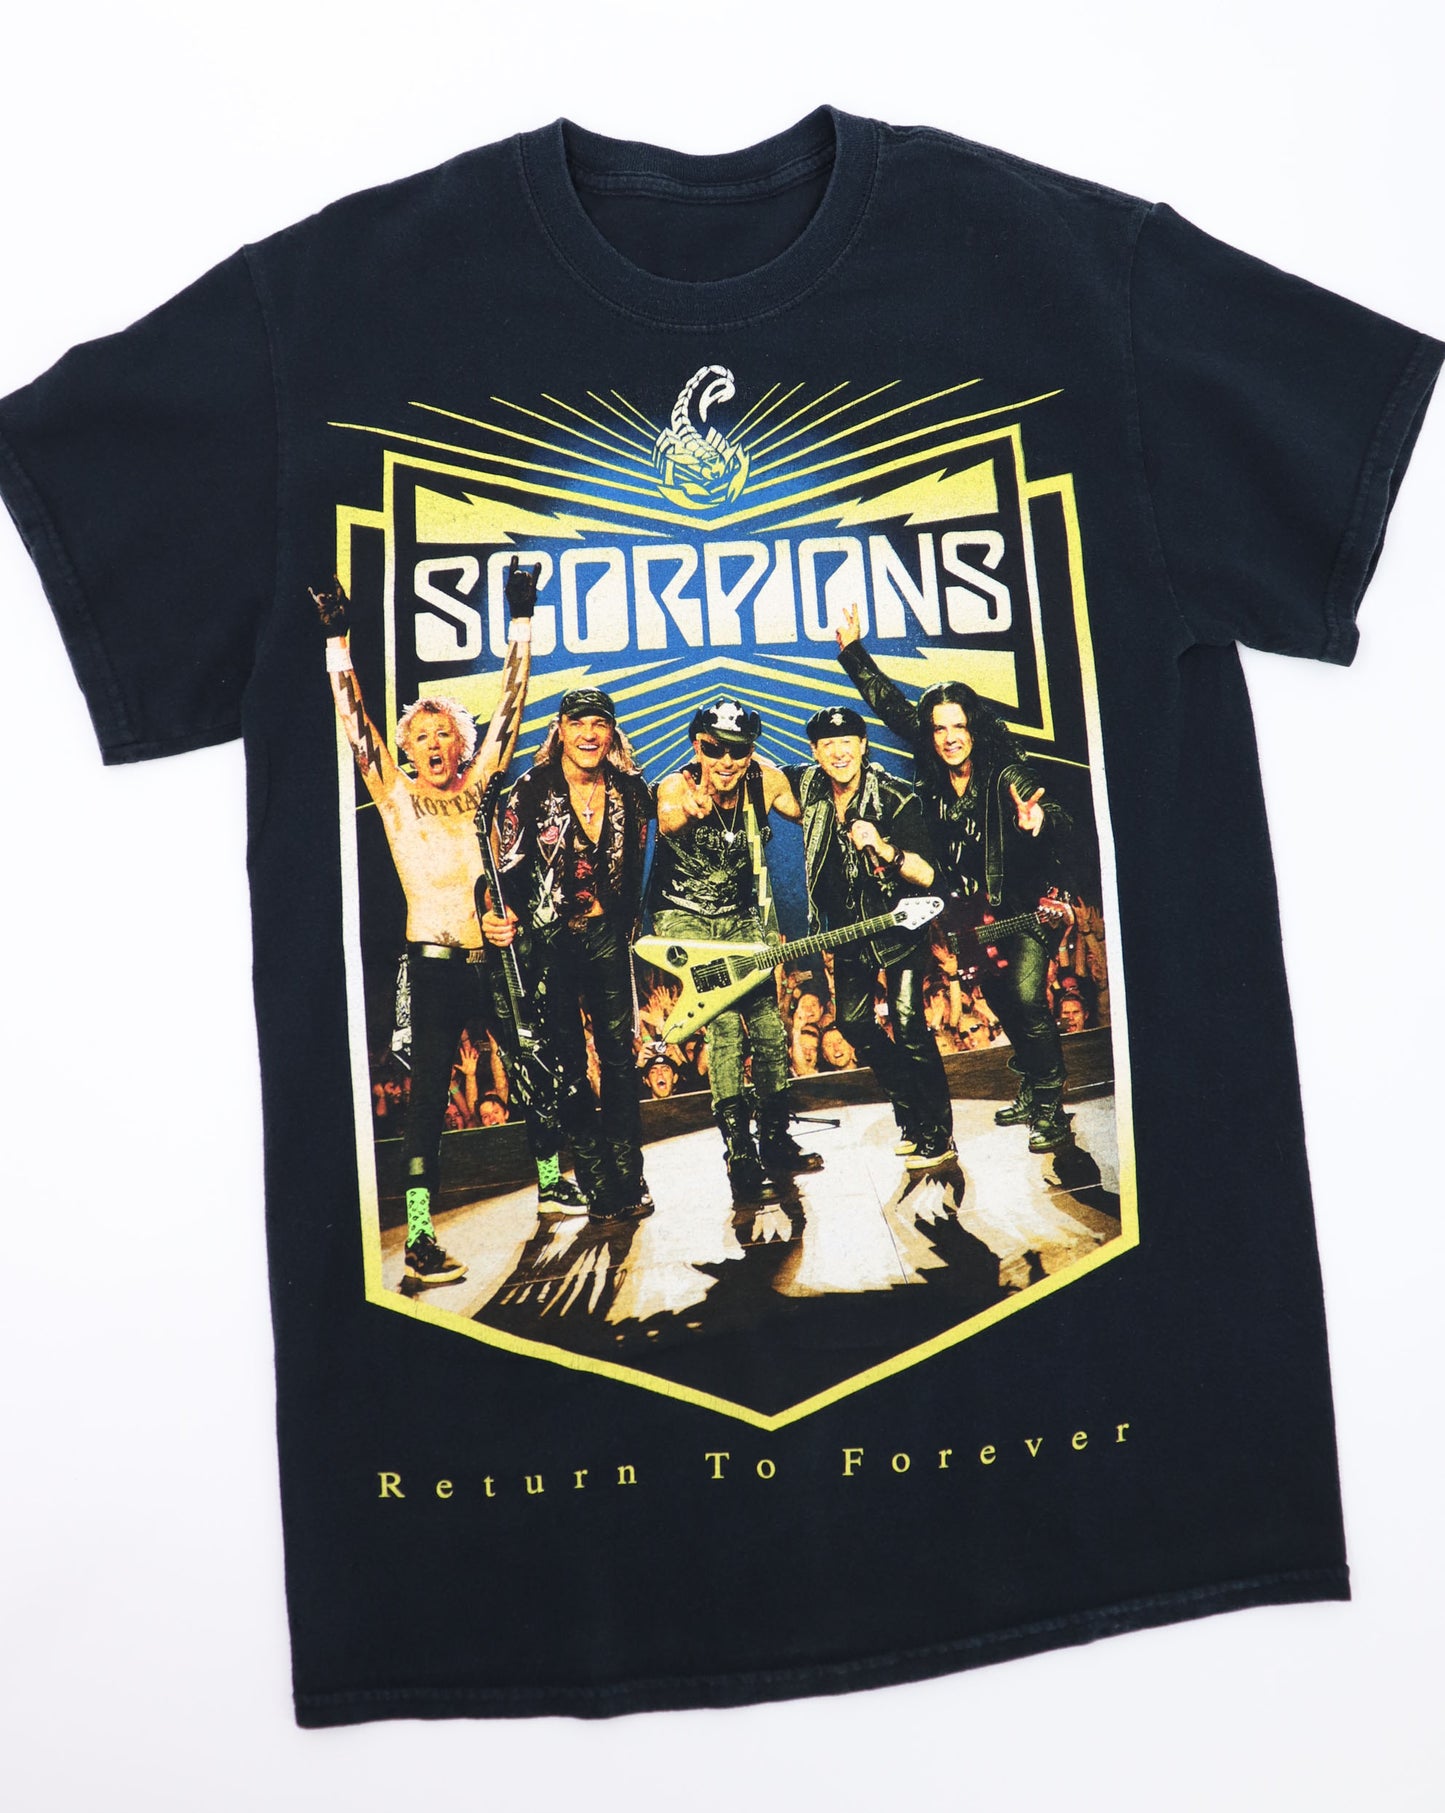 SCORPIONS RETURN TO FOREVER WORLD TOUR 2015